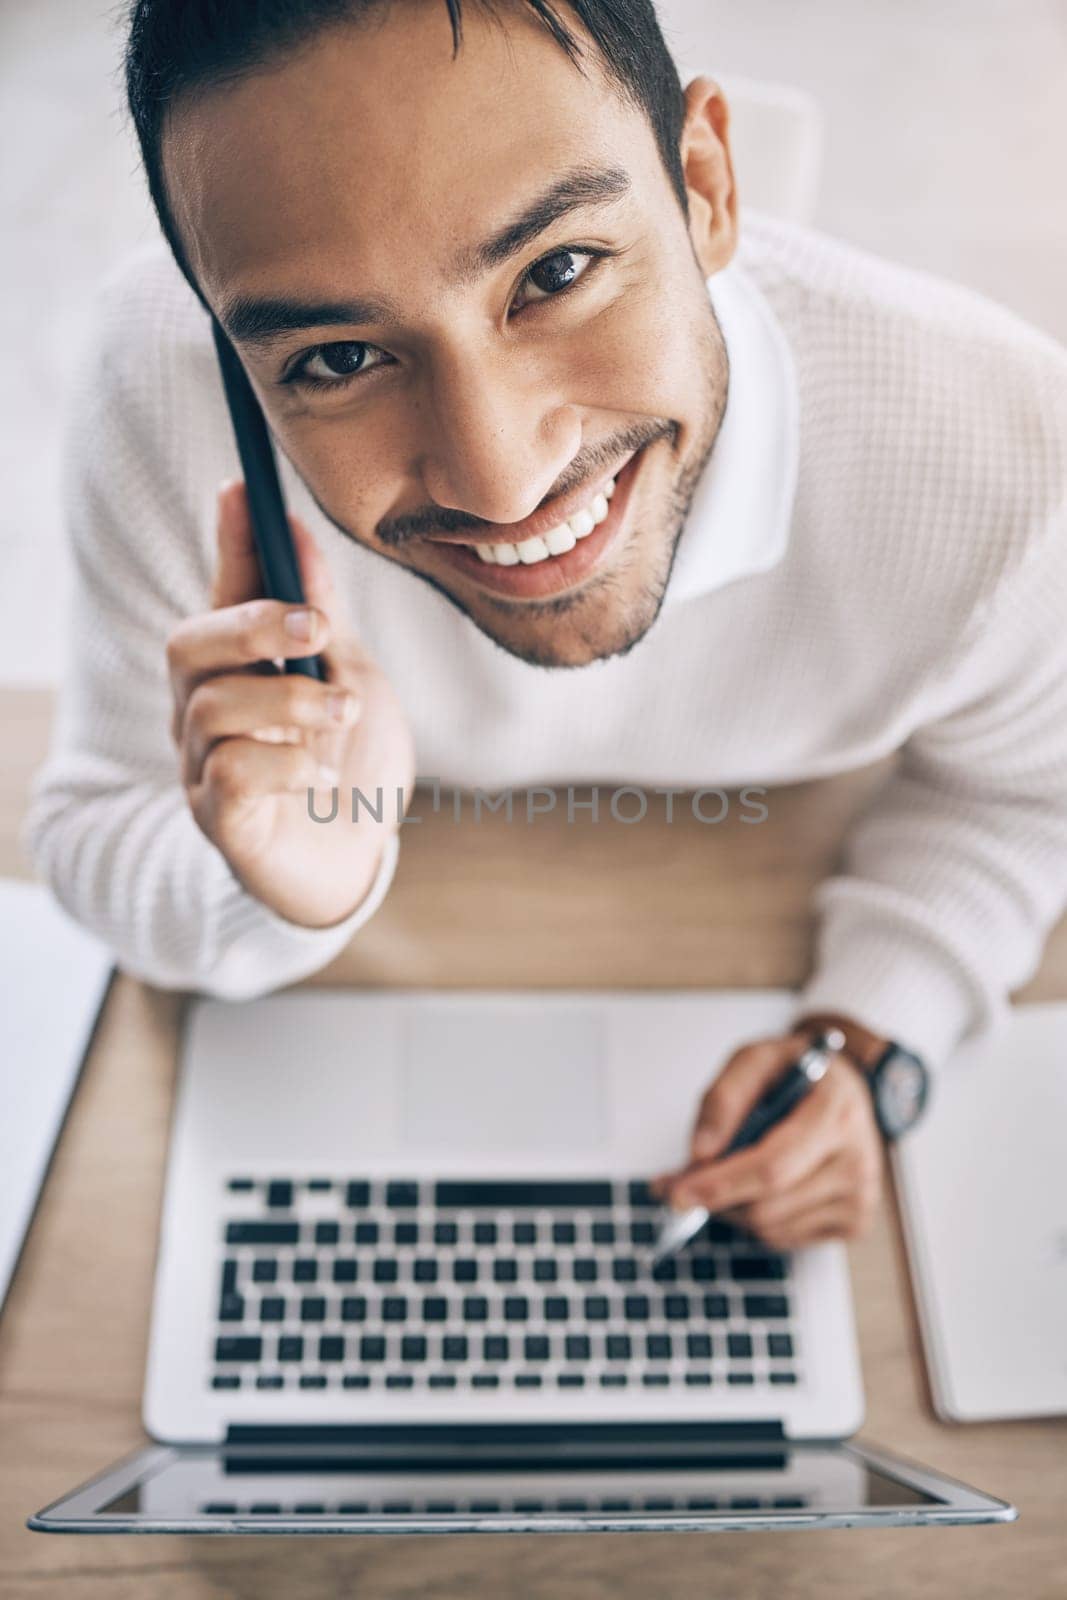 Laptop, phone call and business man with startup planning, marketing copywriting and online productivity at office desk. Networking, technology and sales businessman communication from above portrait.